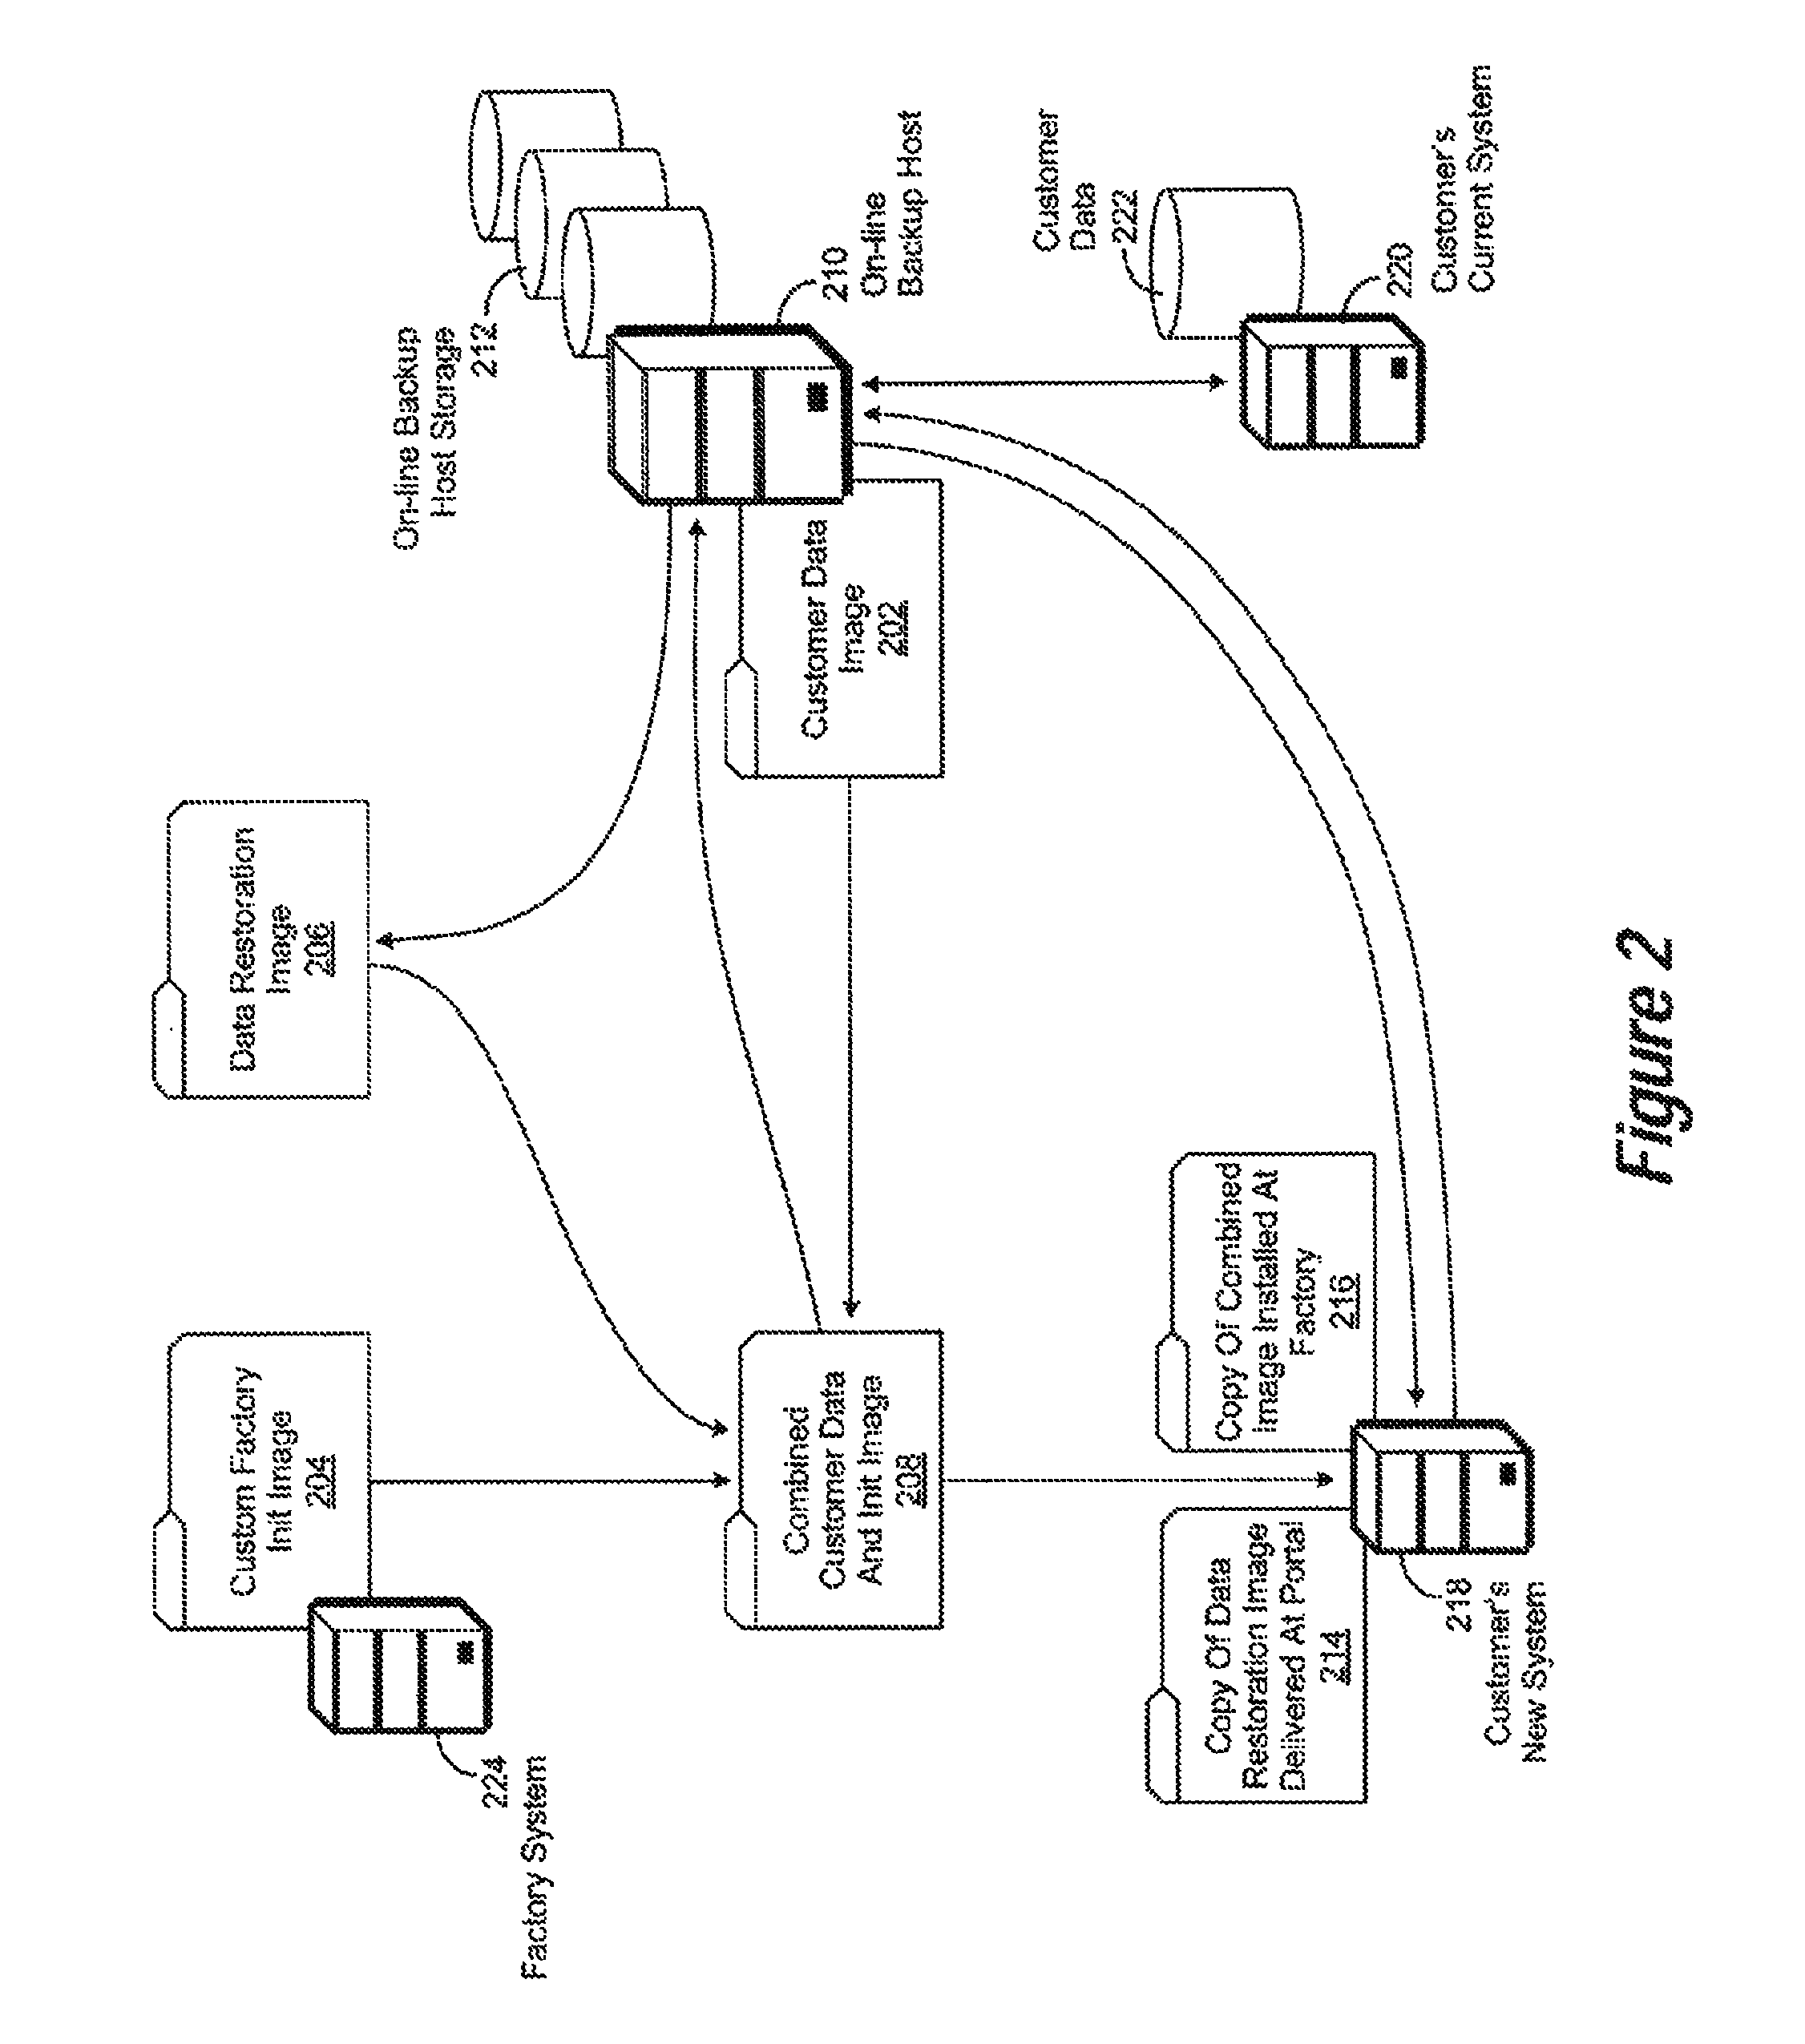 Method and apparatus for full backups in advance